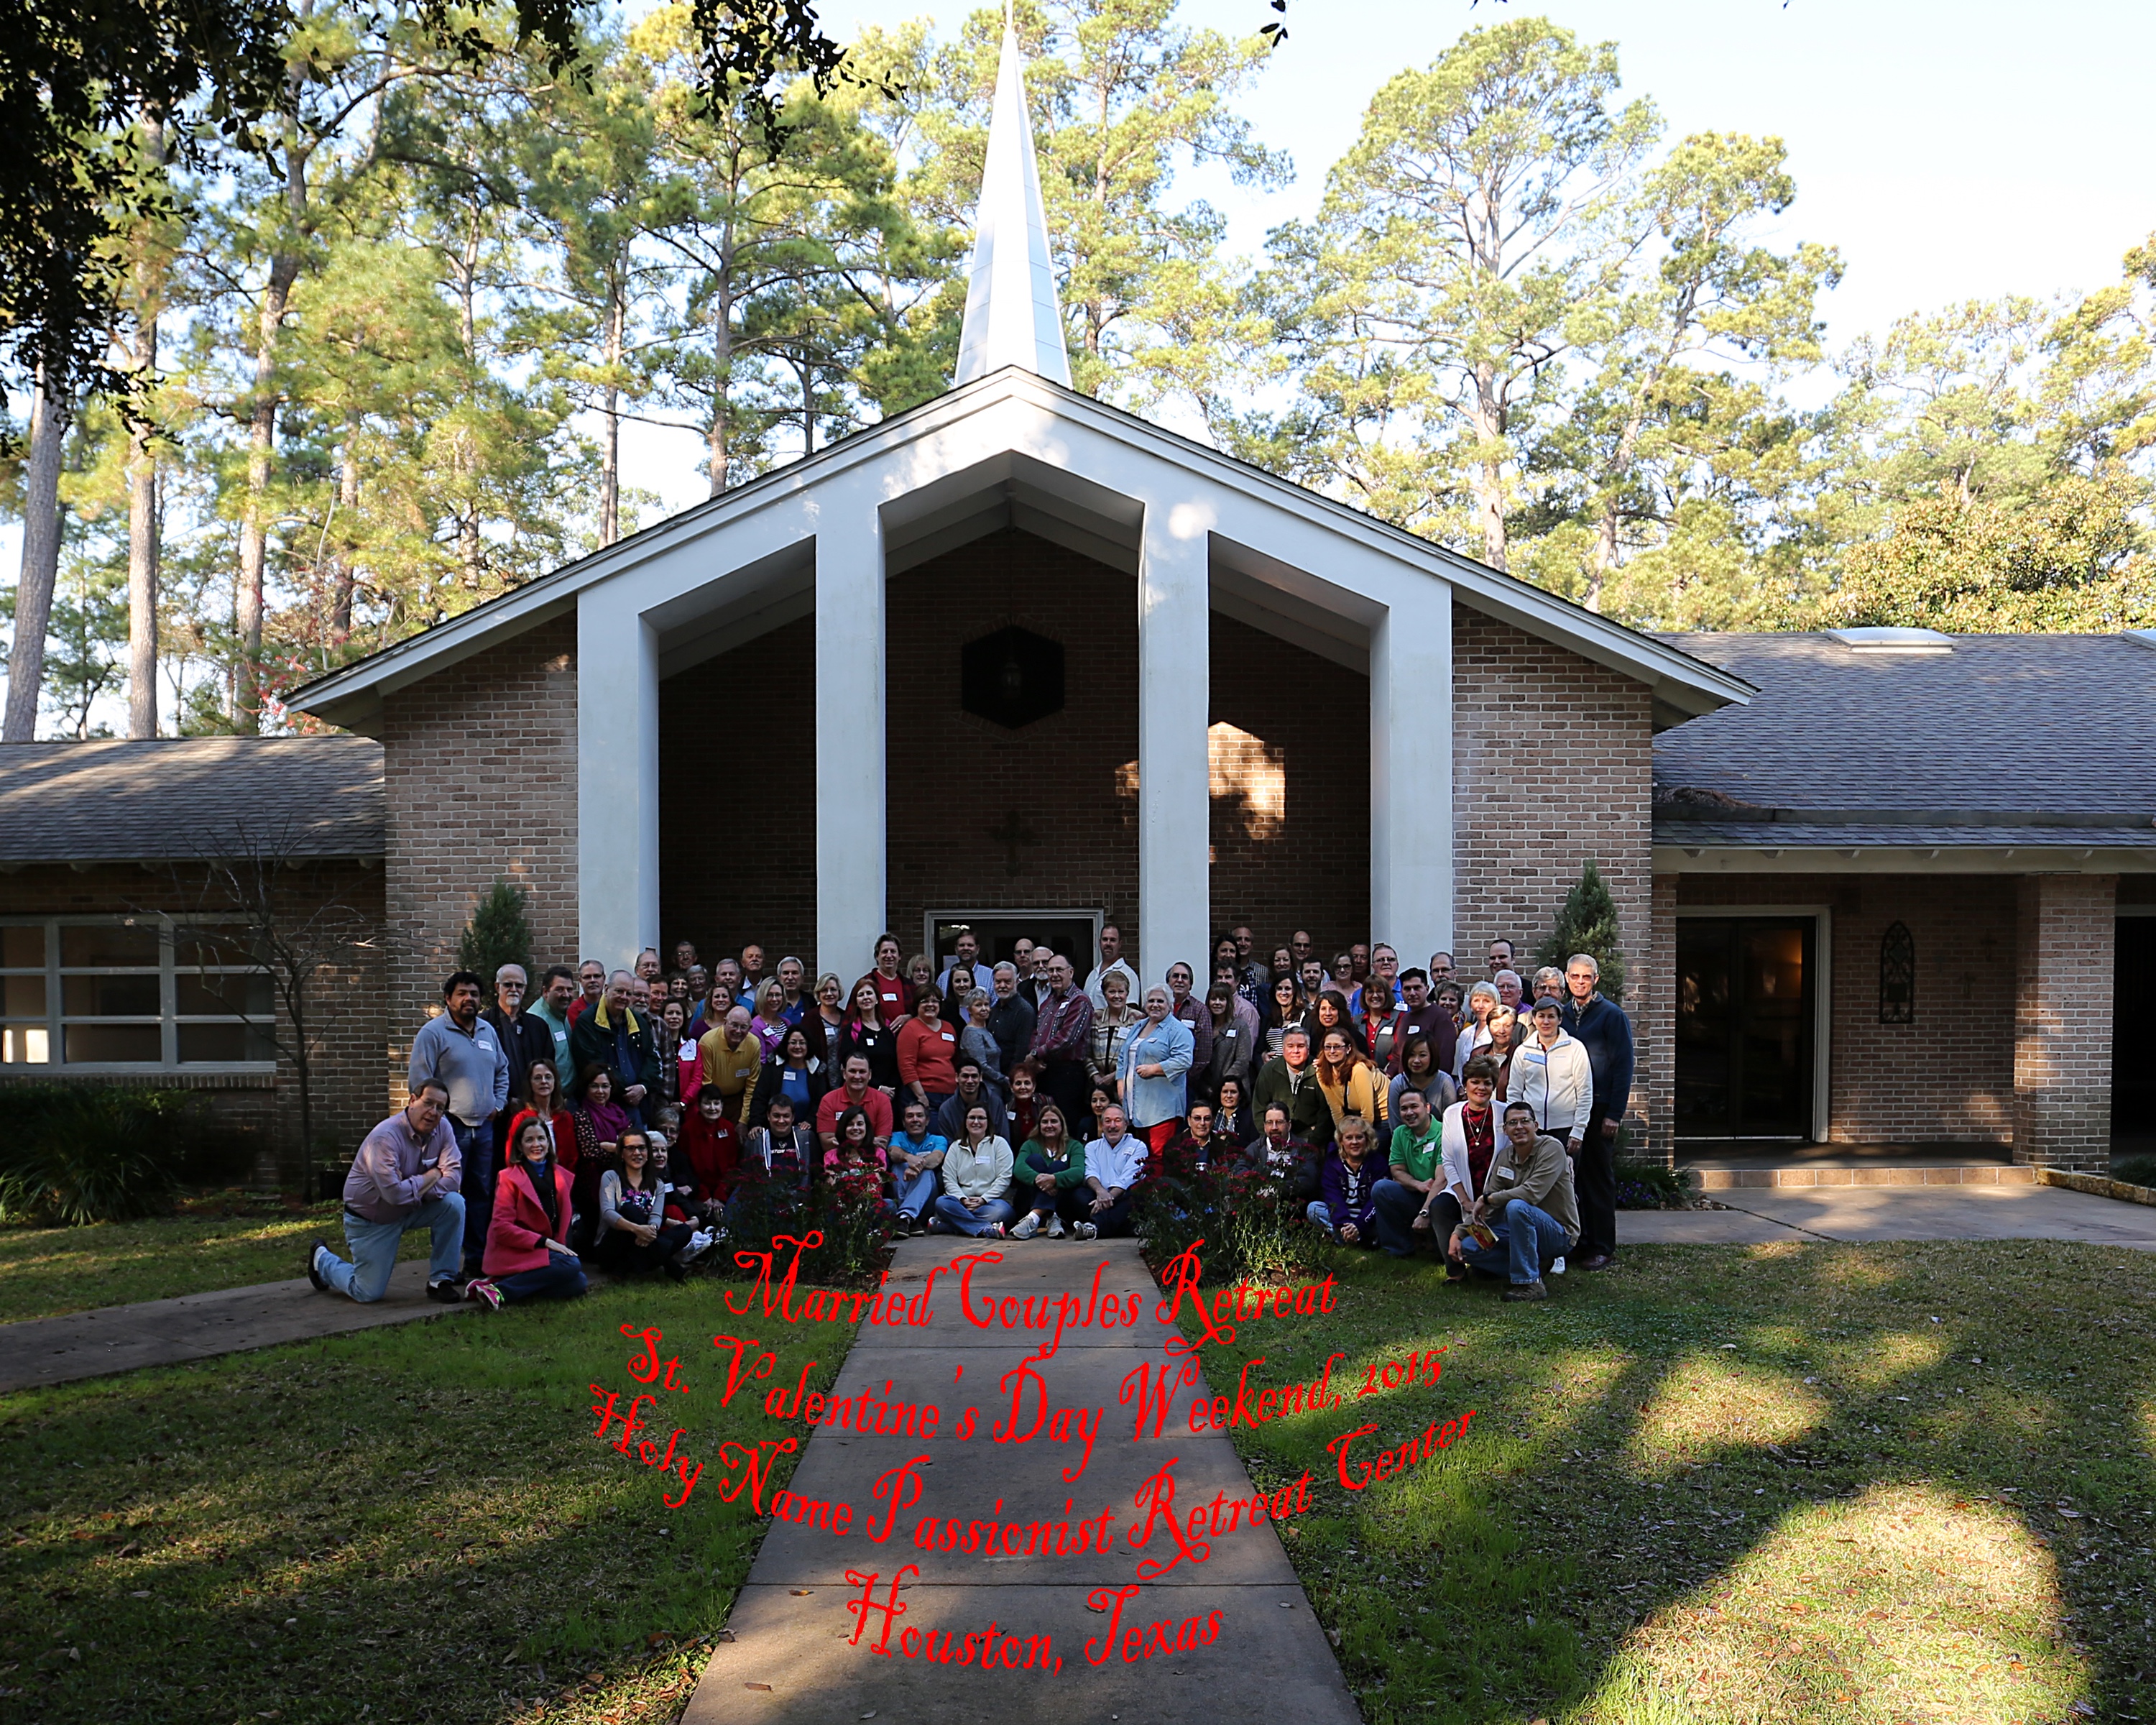 Married Couples Retreat, Feb. 13-15 2015